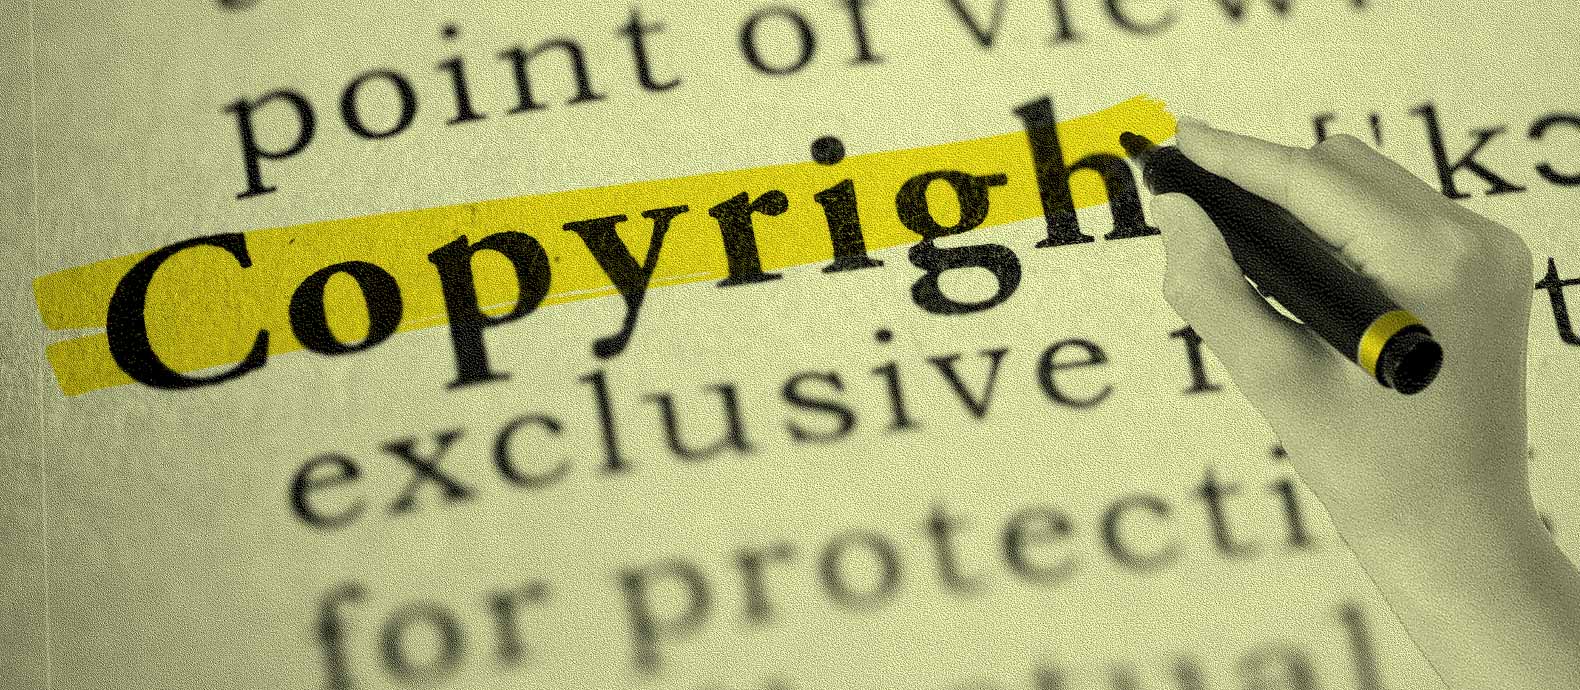 Copyright infringement: What you need to know